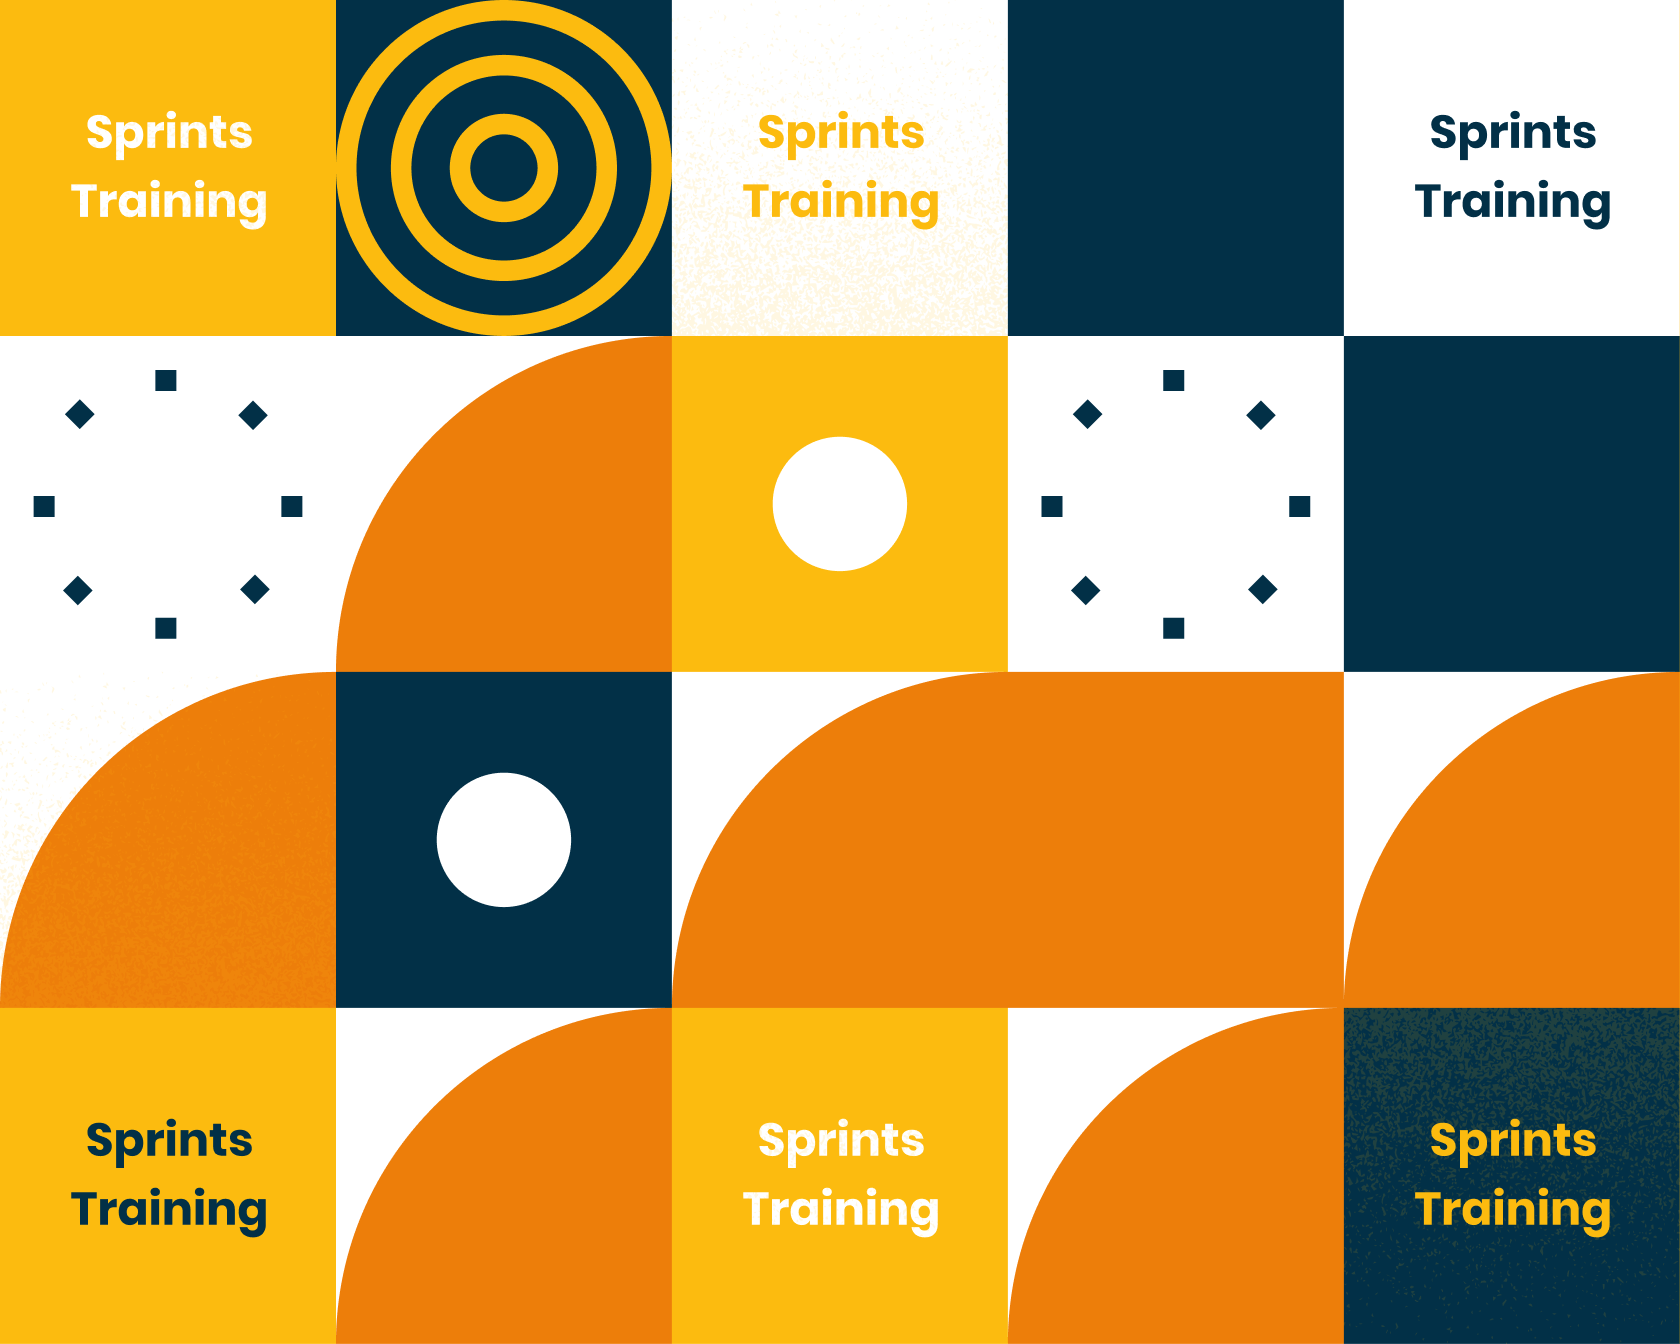 design sprint brought firsthand expertise